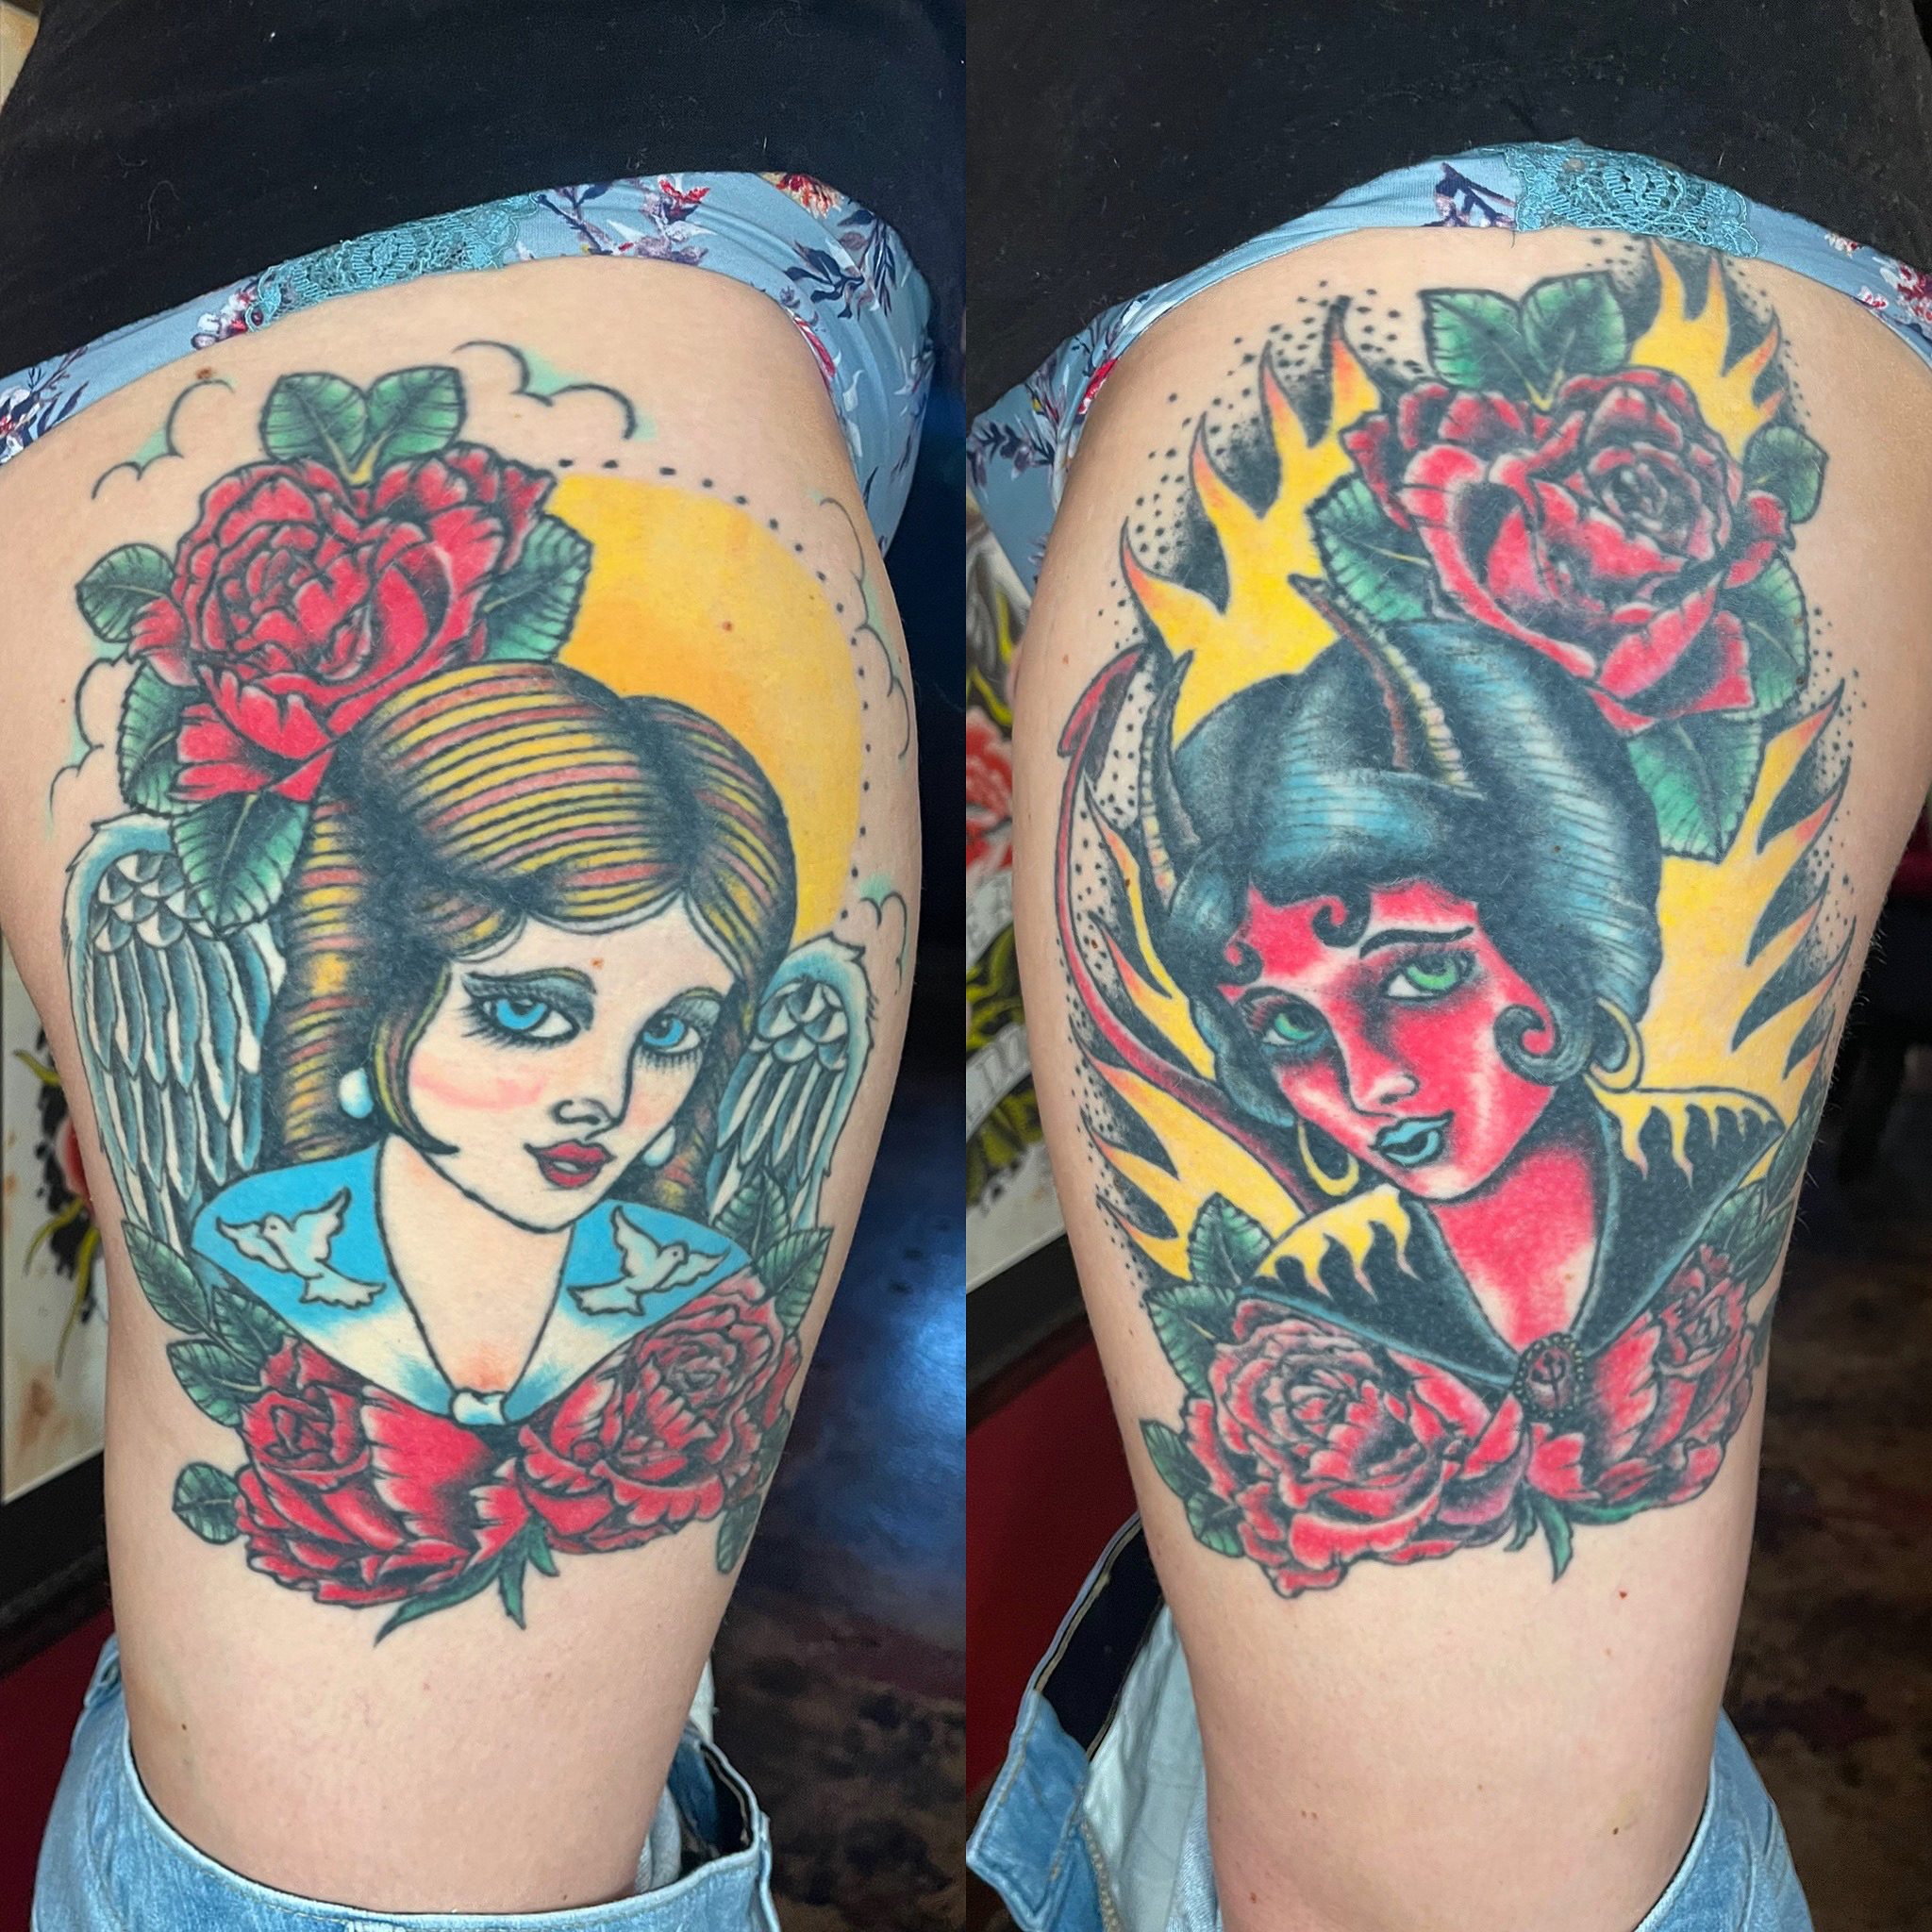 Tattoos of a woman and a devil on a woman's side